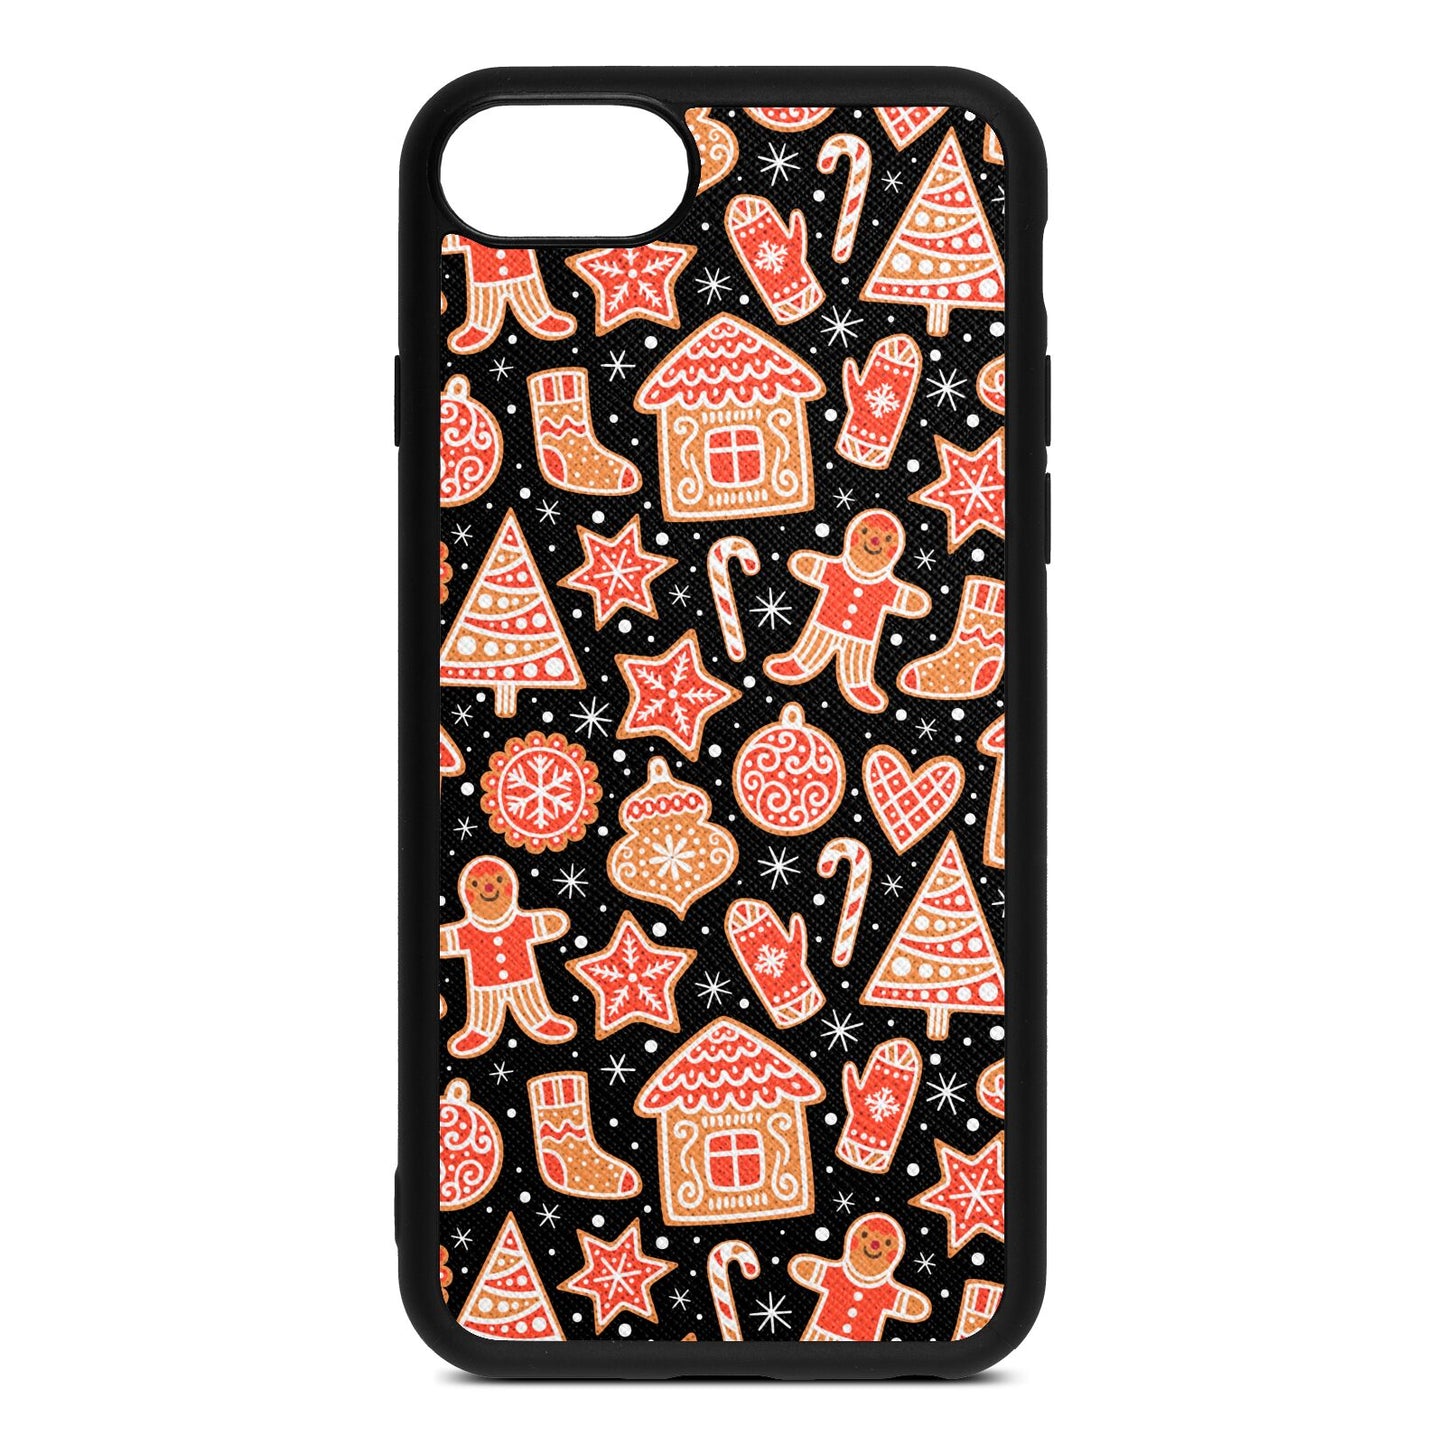 Christmas Gingerbread Black Saffiano Leather iPhone 8 Case